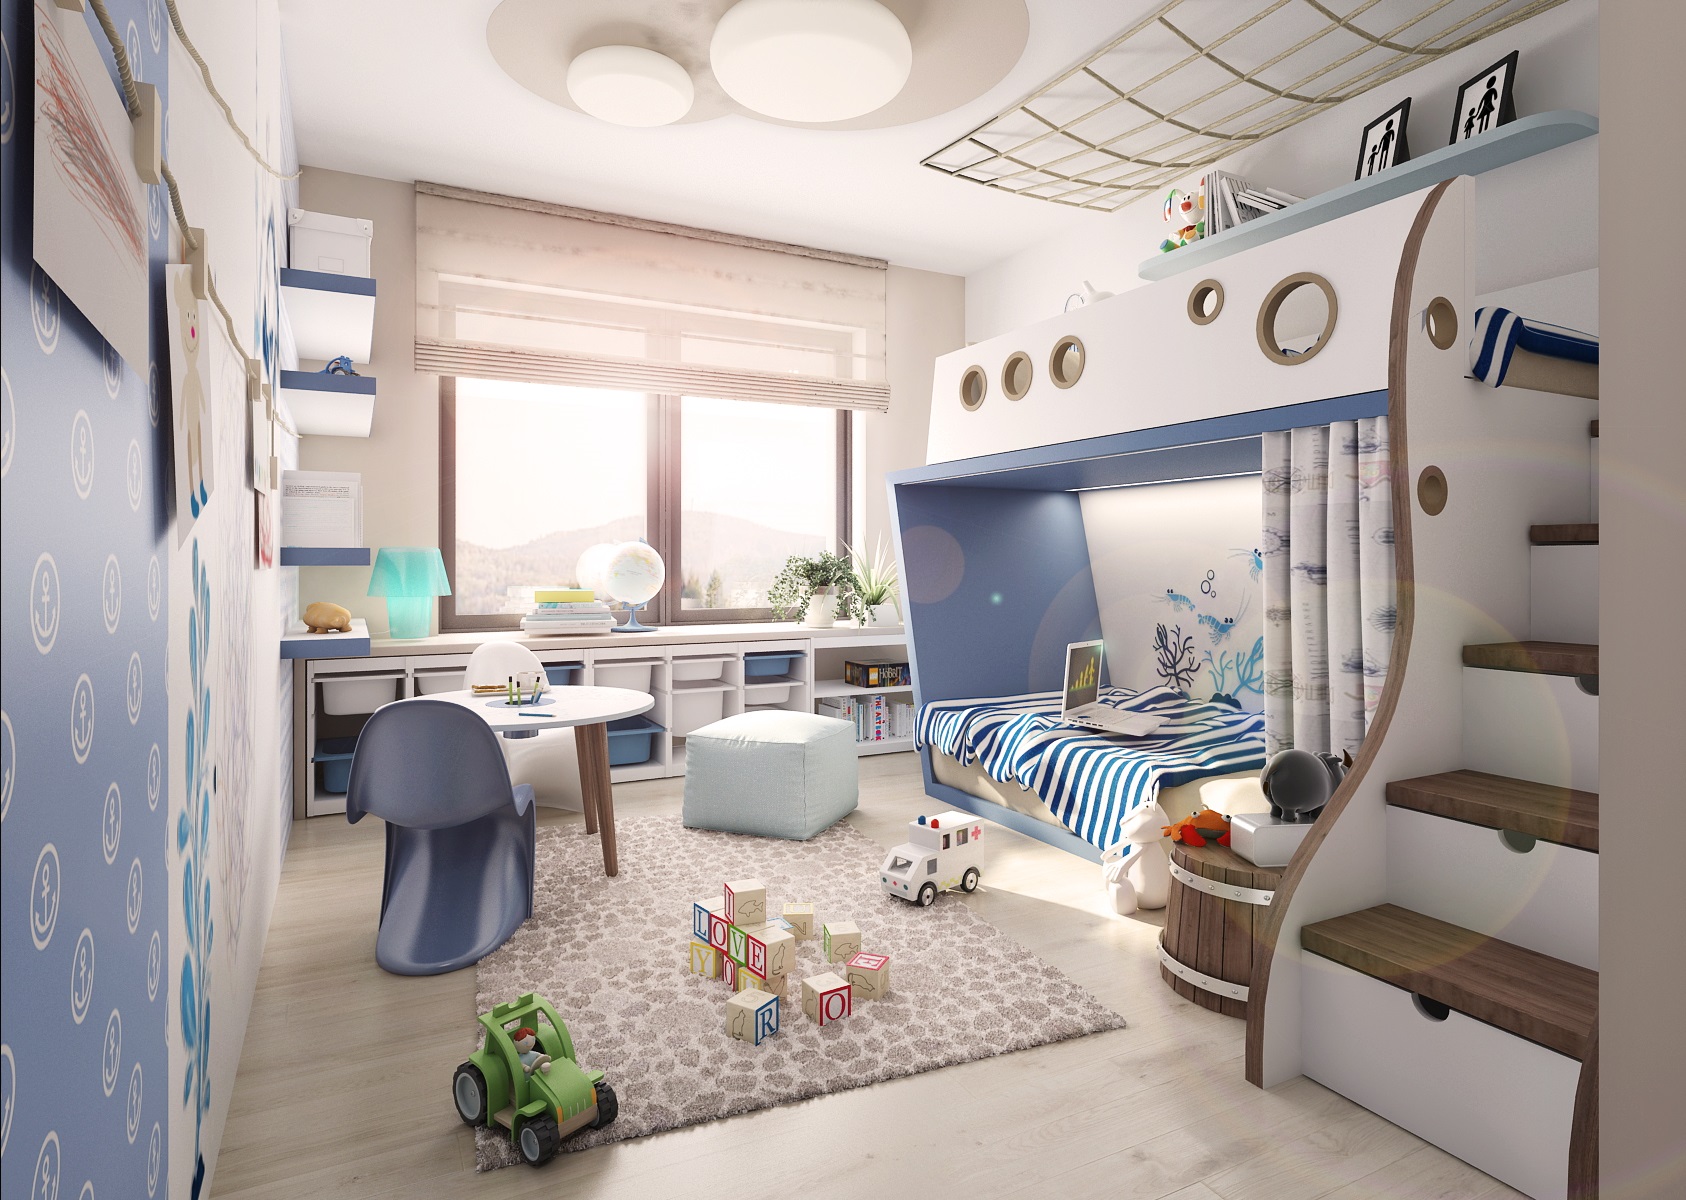 Nautical theme in the interior of a children's room